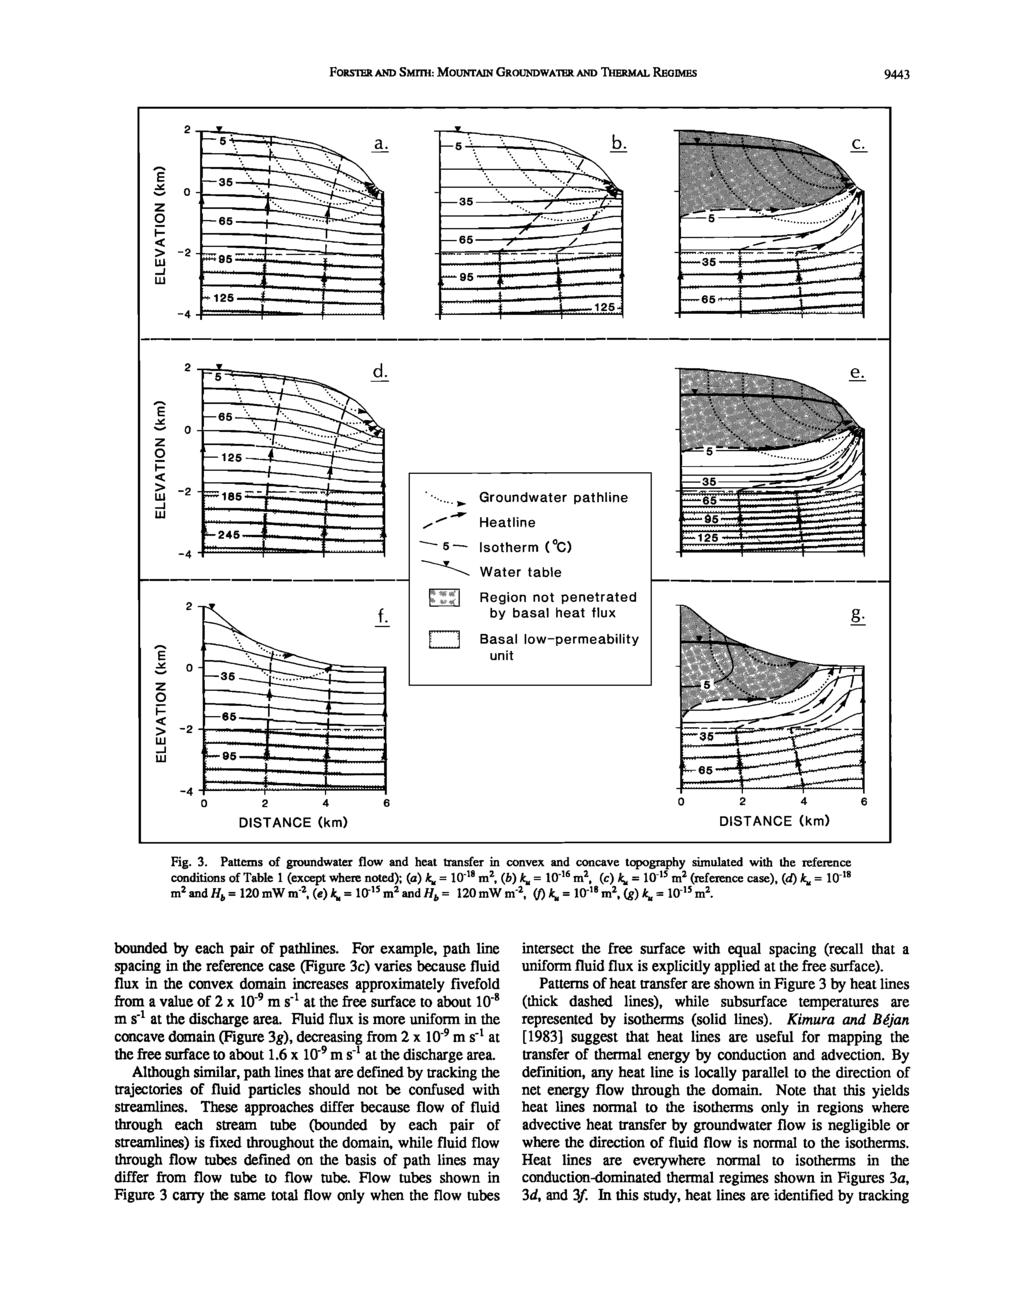 Fluid flow in mountainous regions 2 Slow flow ao Rapid flow 35 C 65 C Forster and Smith, 1989 Here is an example of groundwater flow driven by changes in the